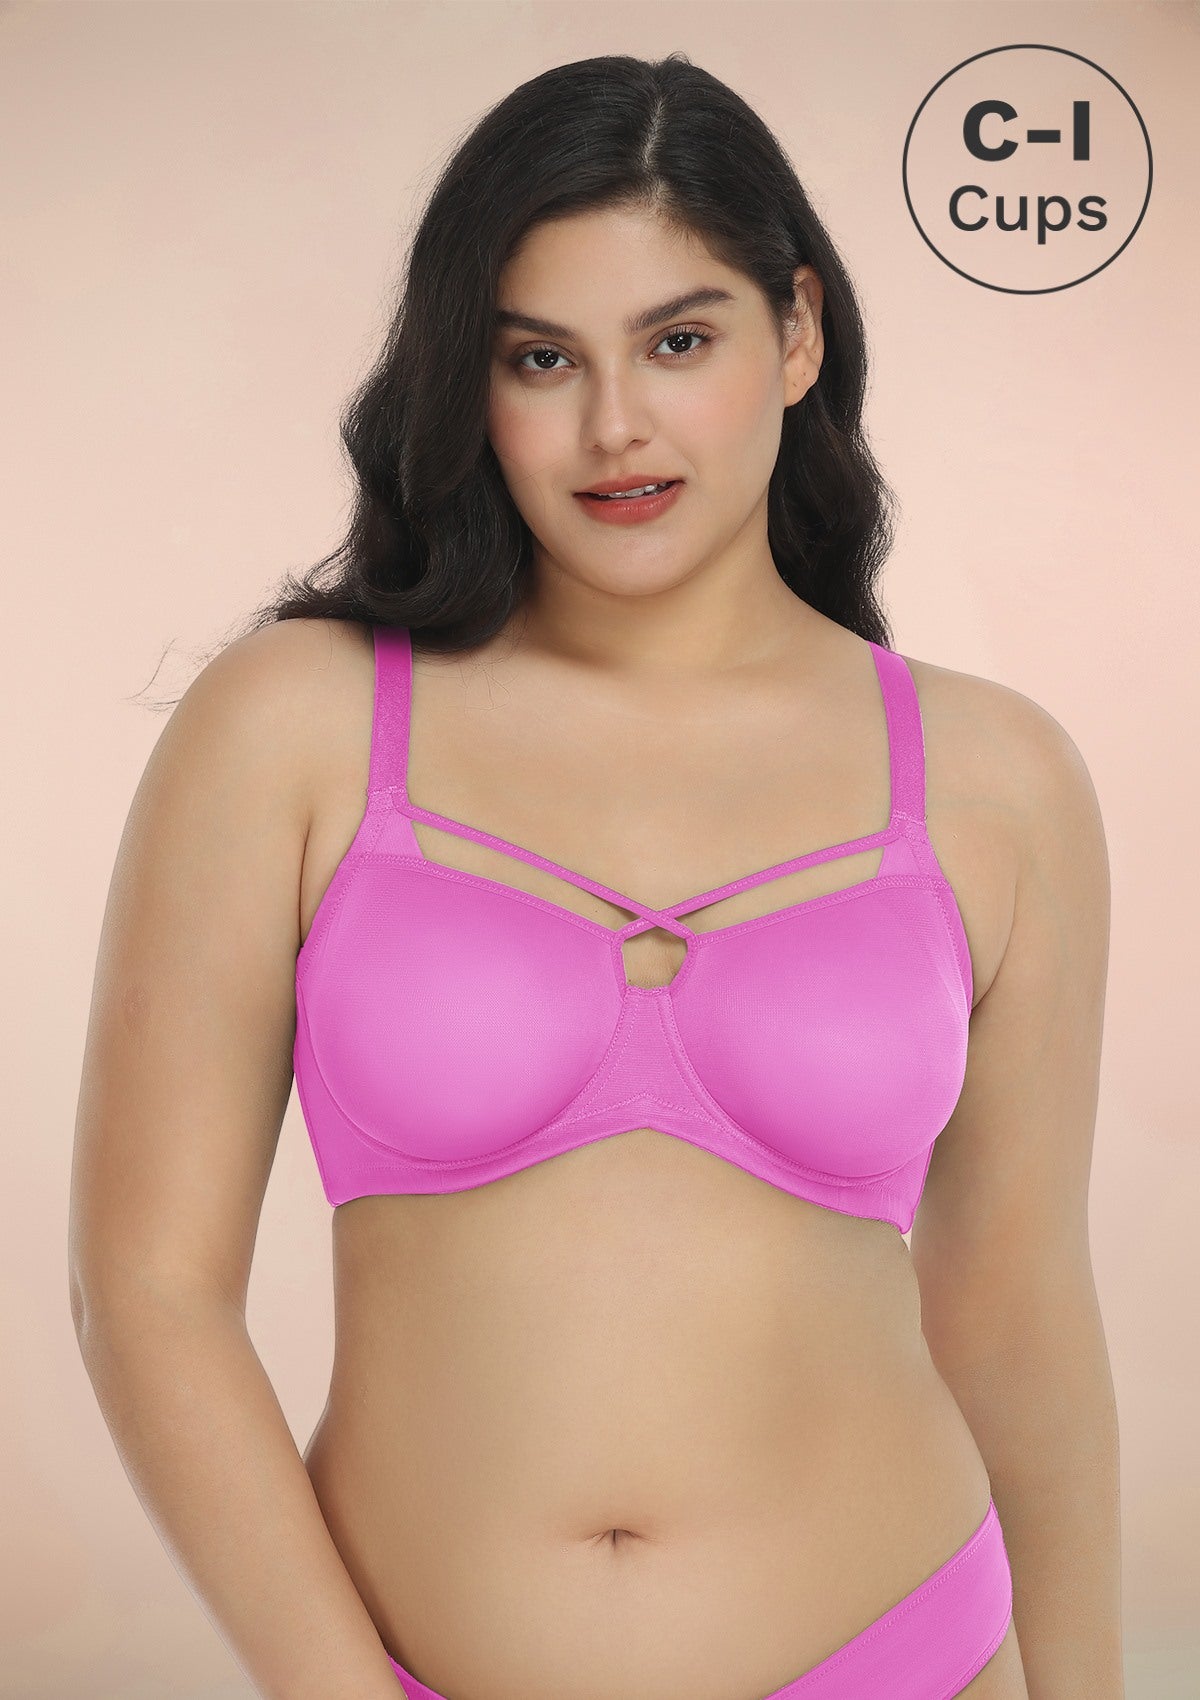 HSIA Billie Cross Front Strap Smooth Sheer Mesh Comfy Underwire Bra - Barbie Pink / 42 / DD/E